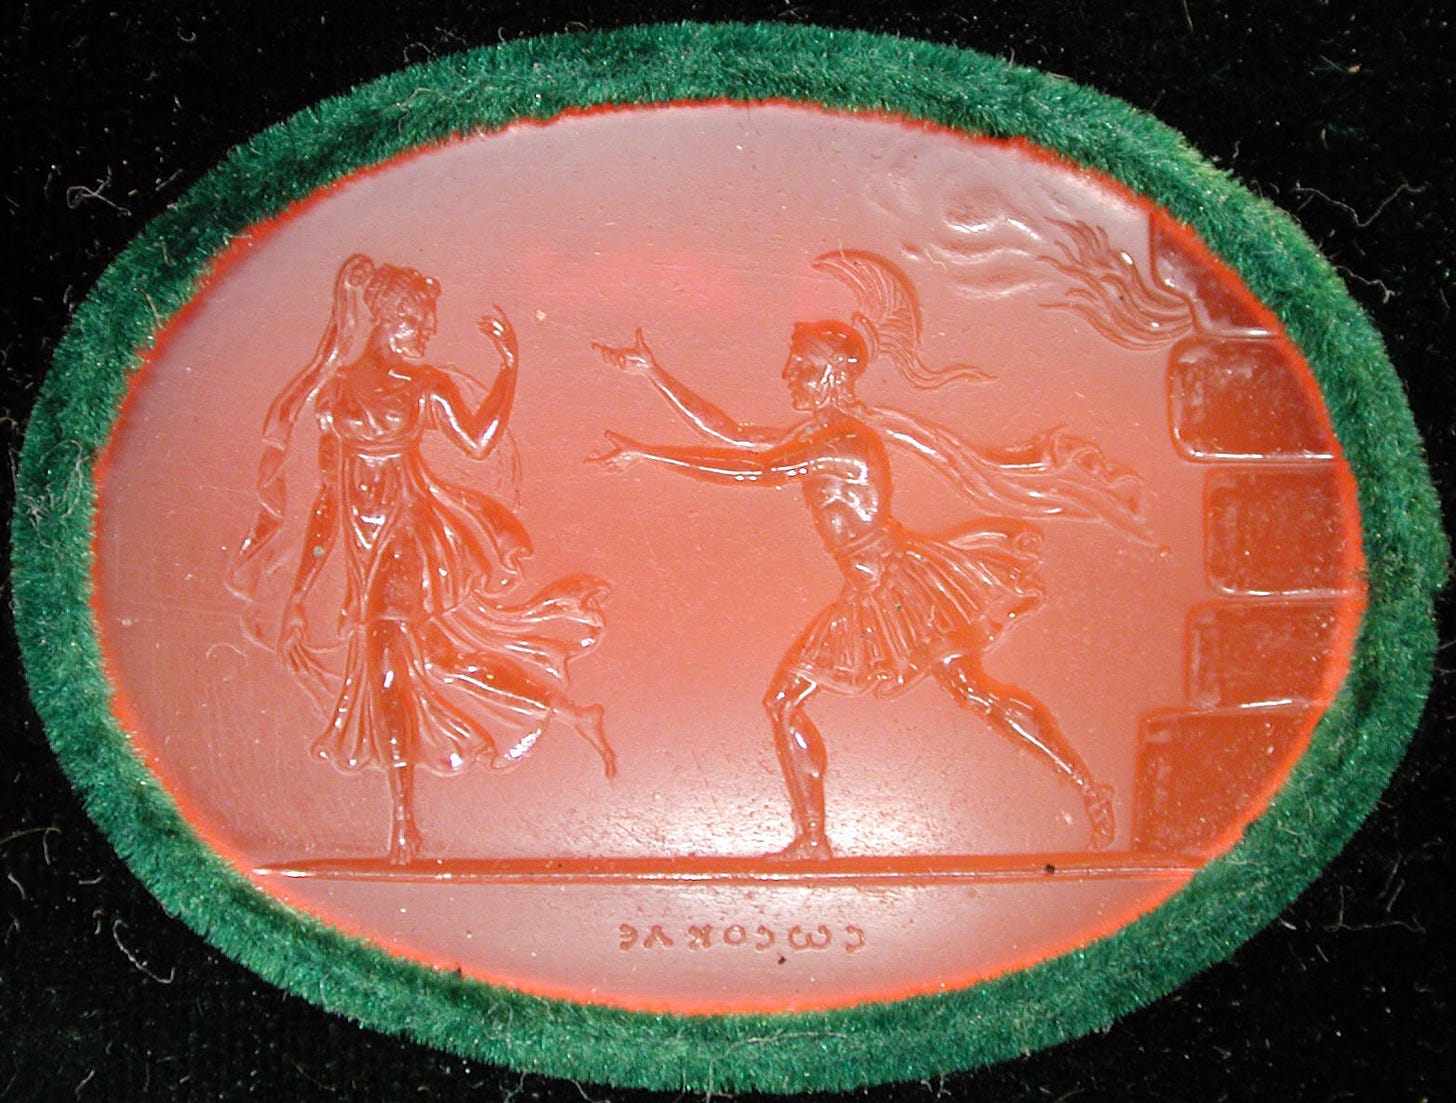 (Fake) intaglio of the ghost of Creusa disappearing from Aeneas near the burning wall of Troy